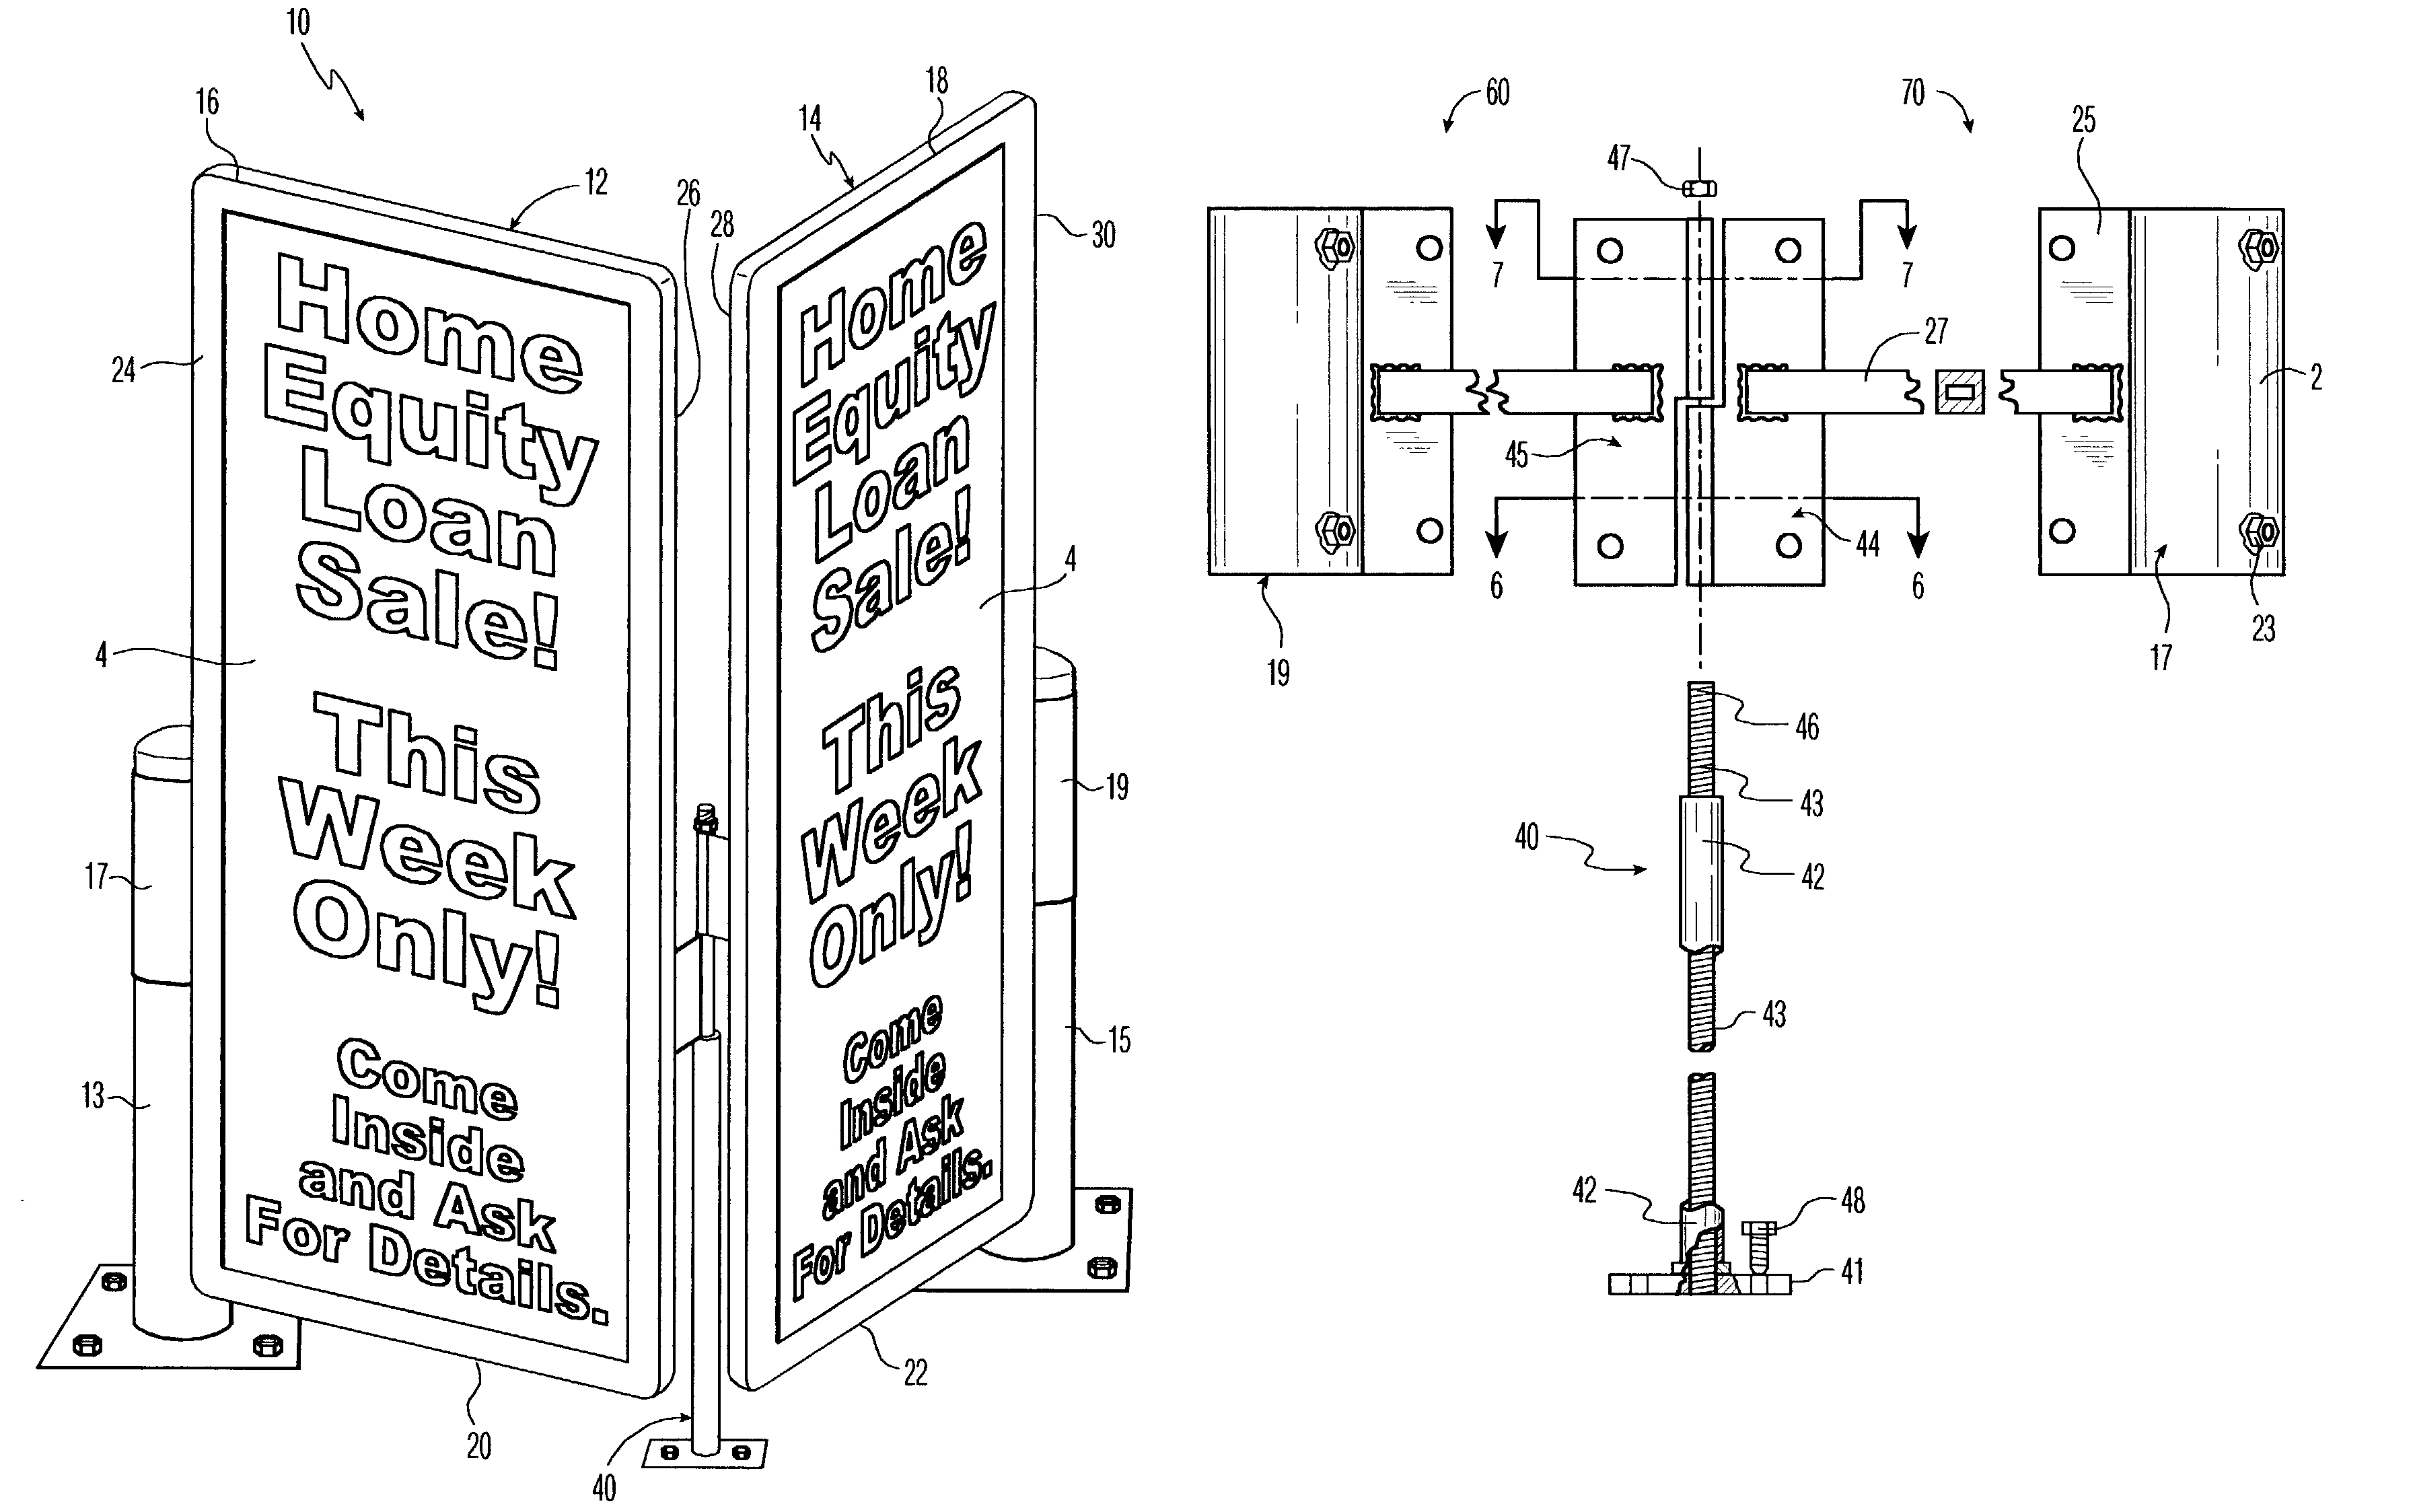 Sign assembly with mounting assembly